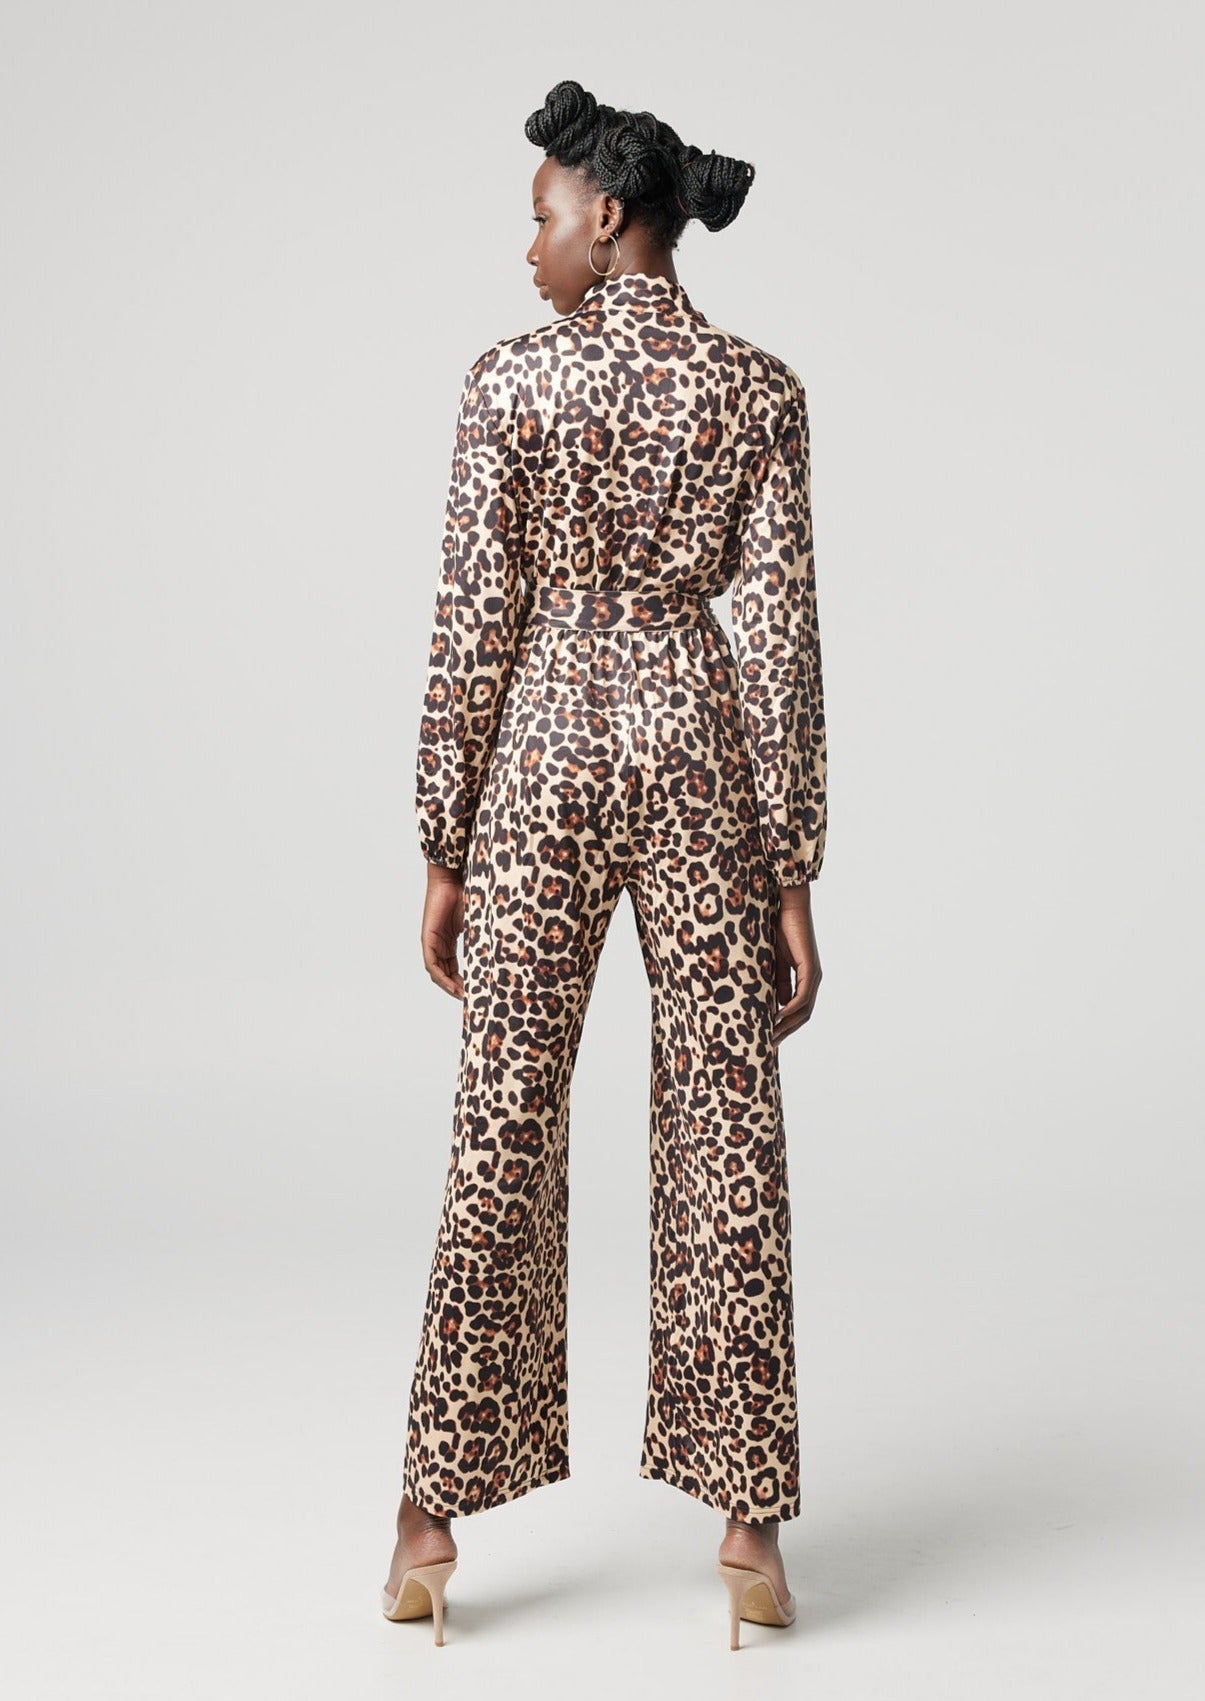 "Ready Set Go" Jumpsuit Leopard / Black-Why Mary-stride